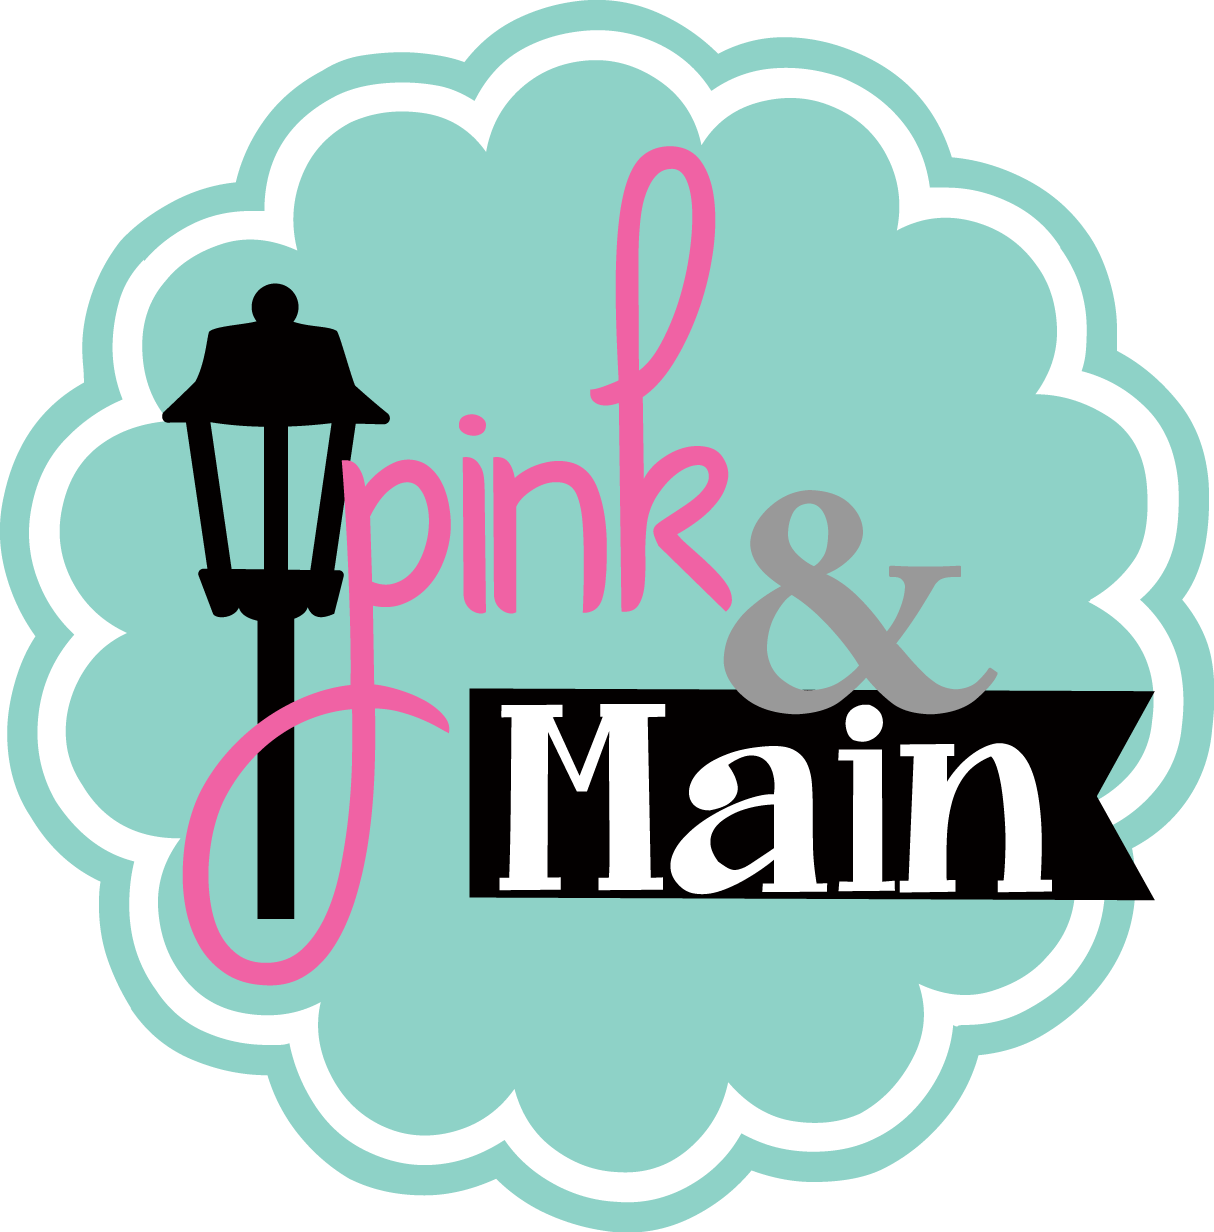 Shop Pink and Main Stamps